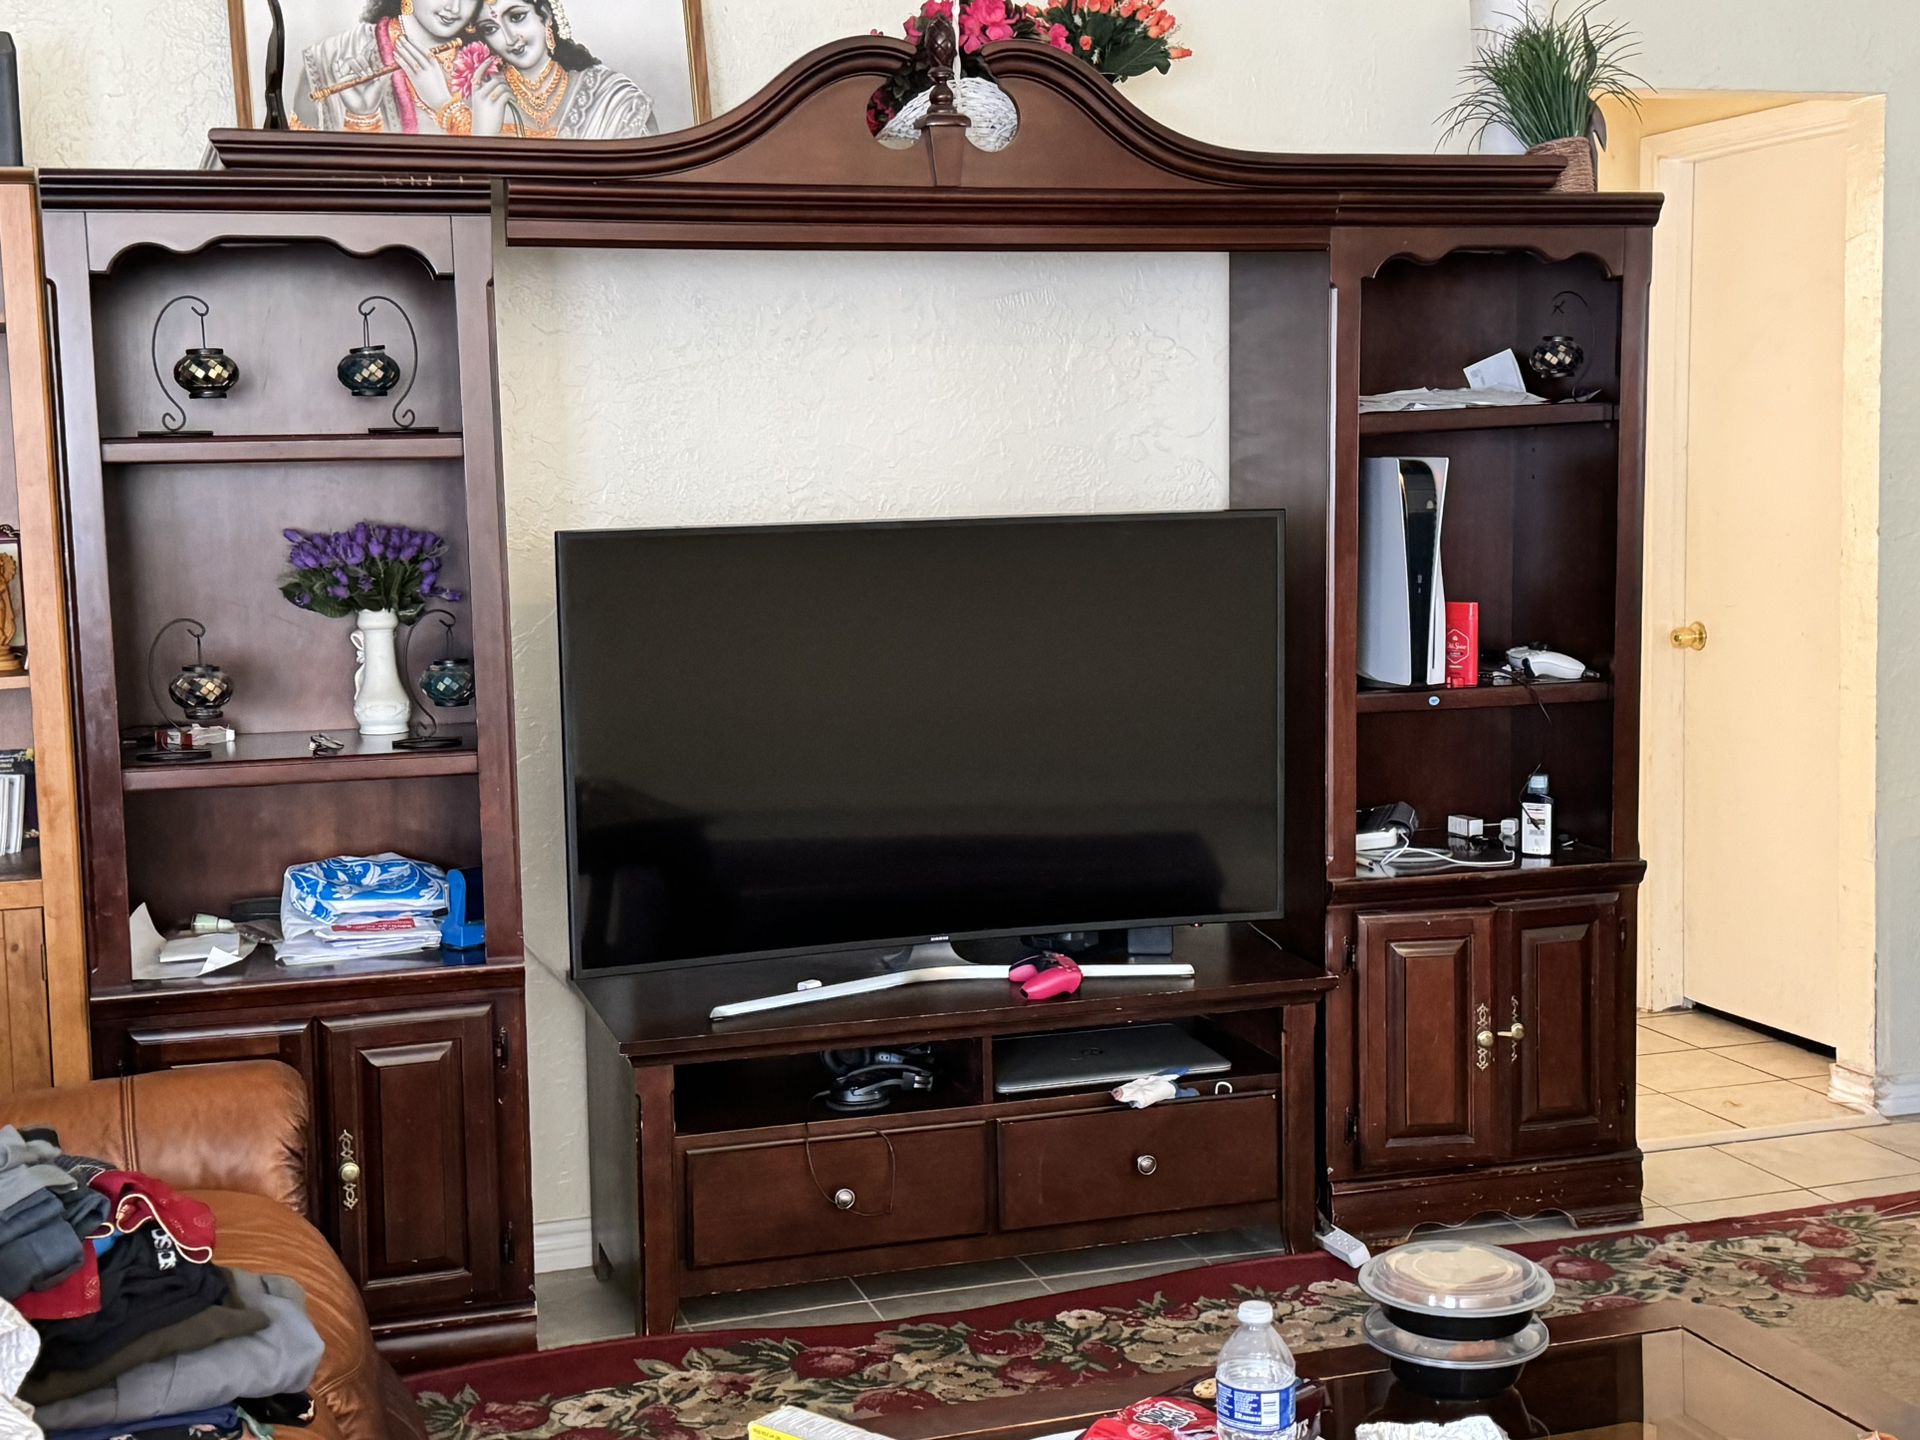 TV Stand And Wooden Framing Around It.